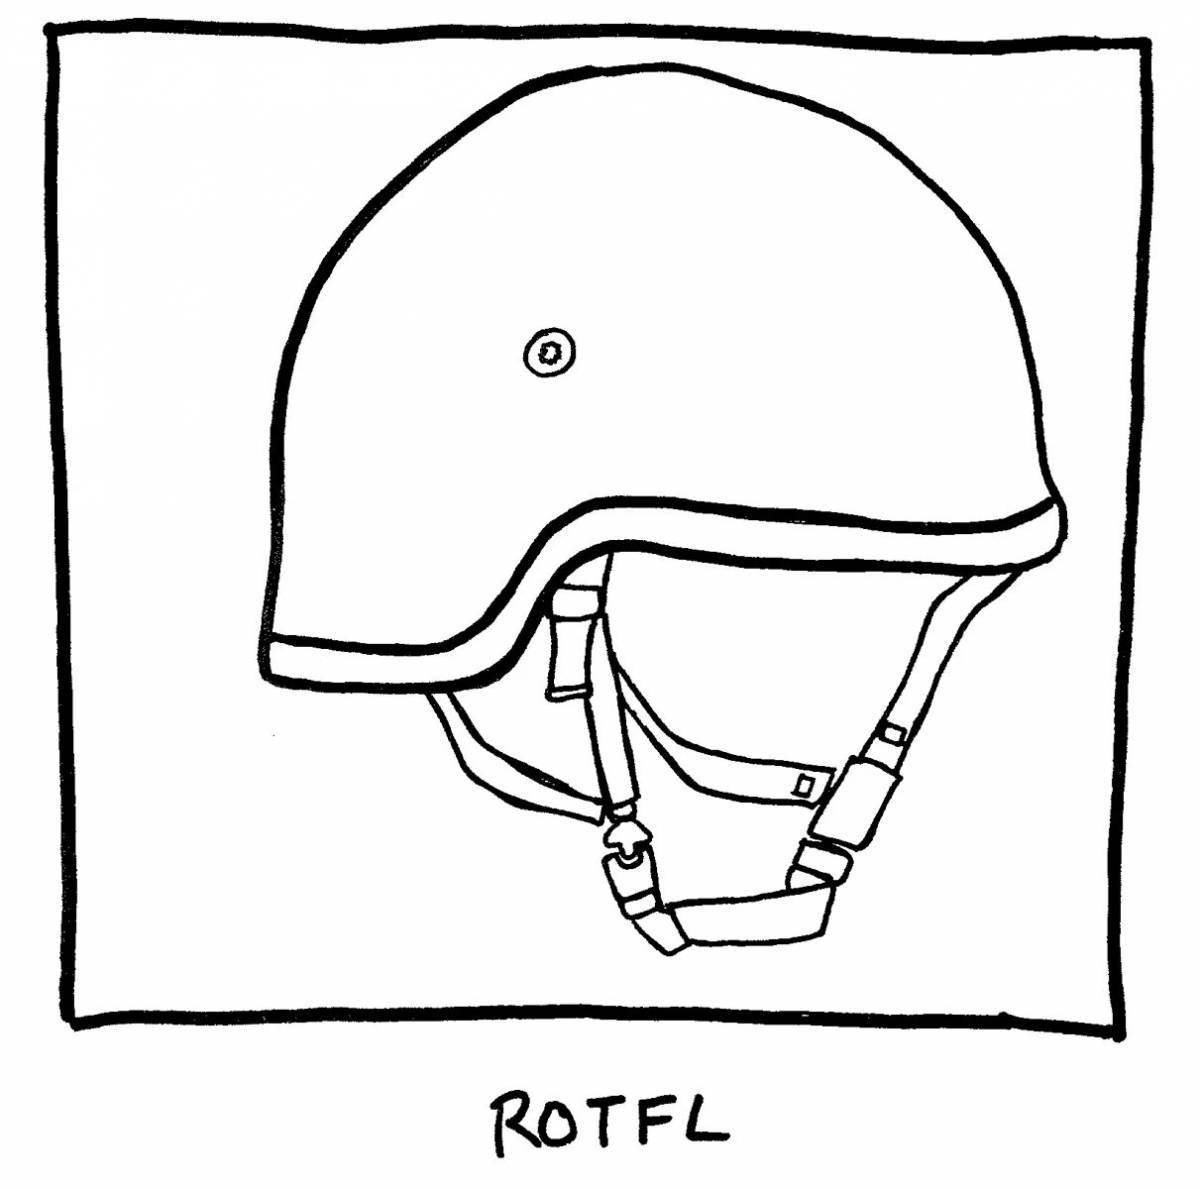 Colourful military helmet coloring book for kids